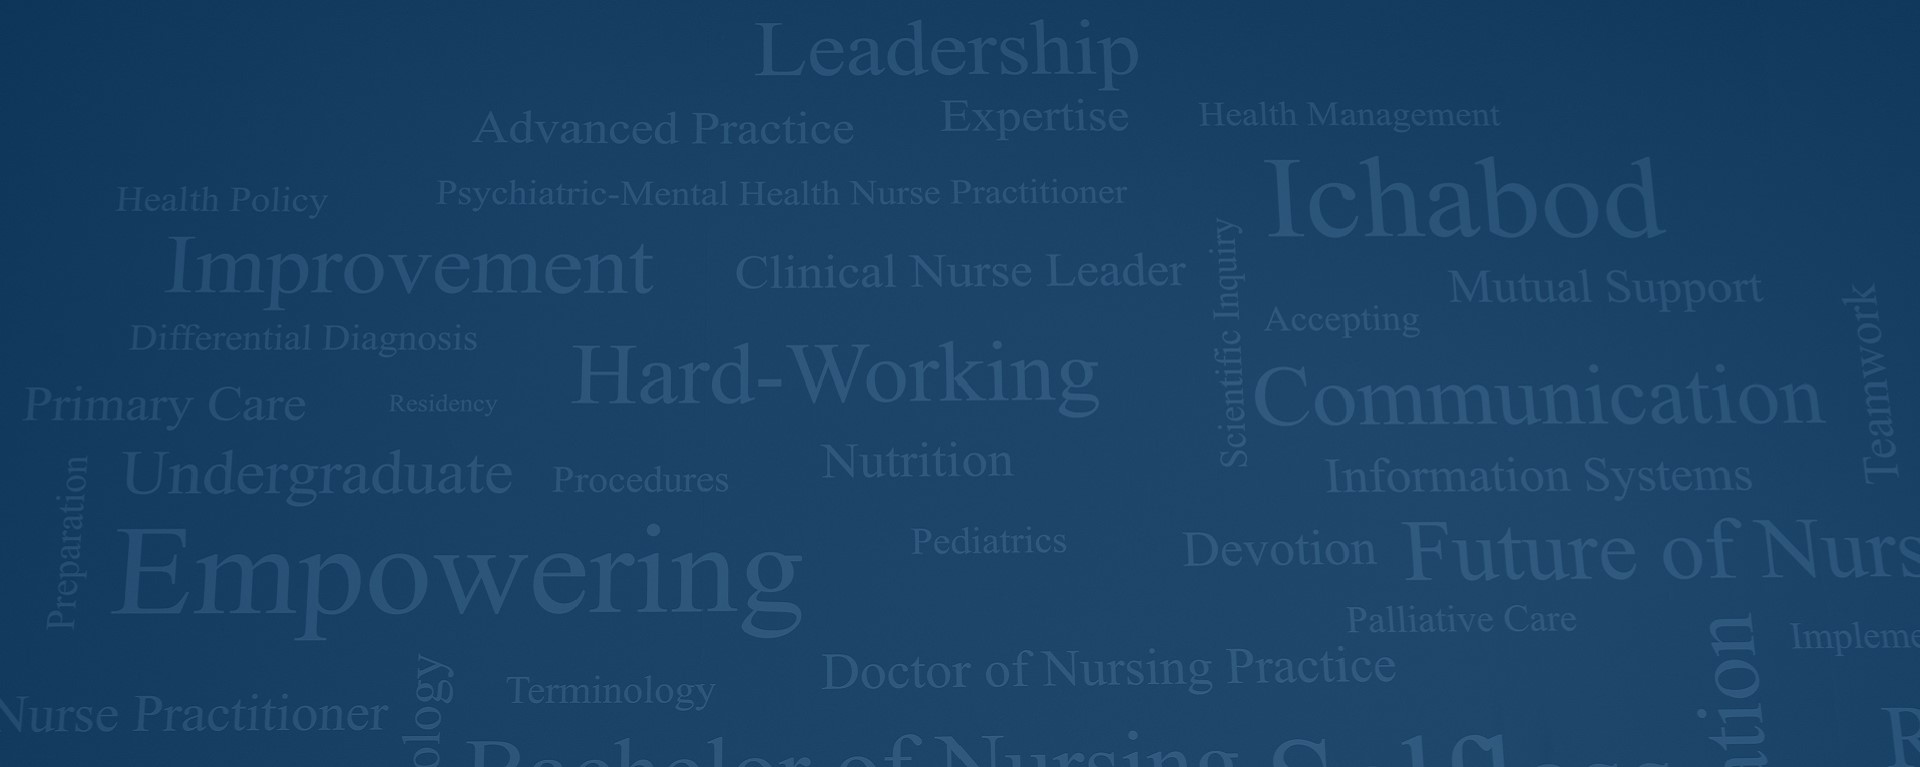 Word cloud of key concepts related to Nursing education.